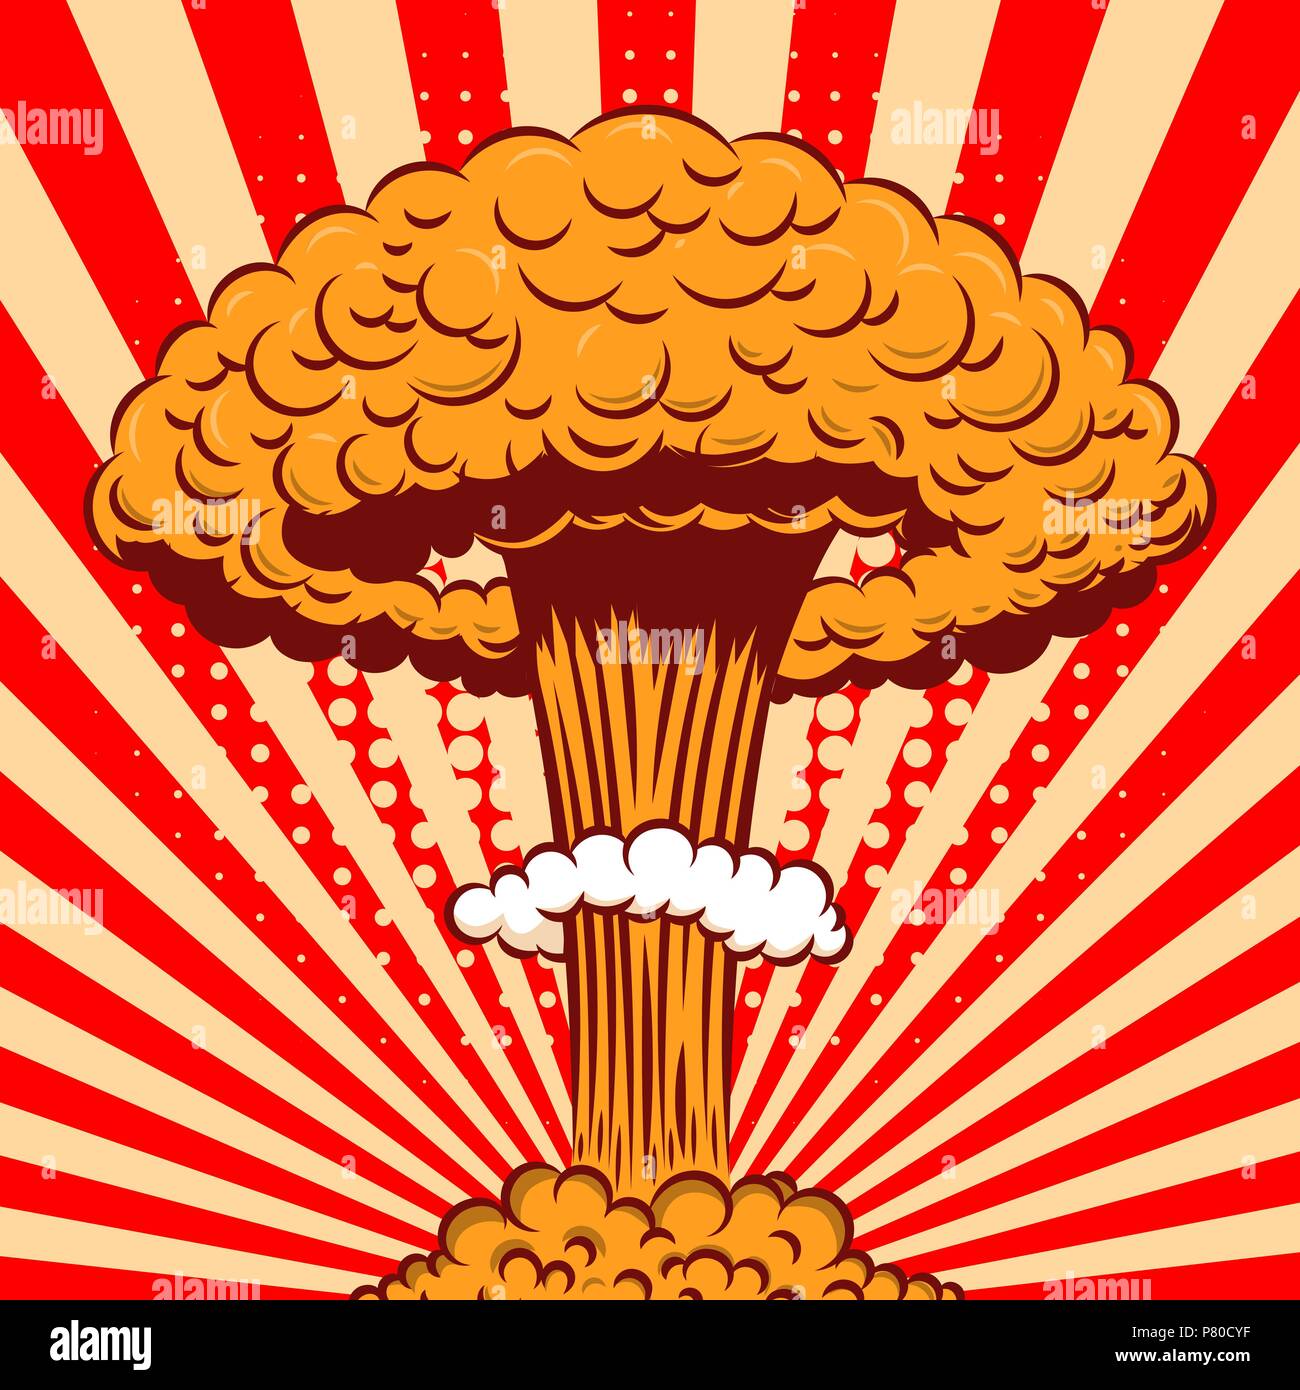 Nuclear explosion in cartoon style on comic background. Design element for poster, card, banner, flyer. Vector illustration Stock Vector